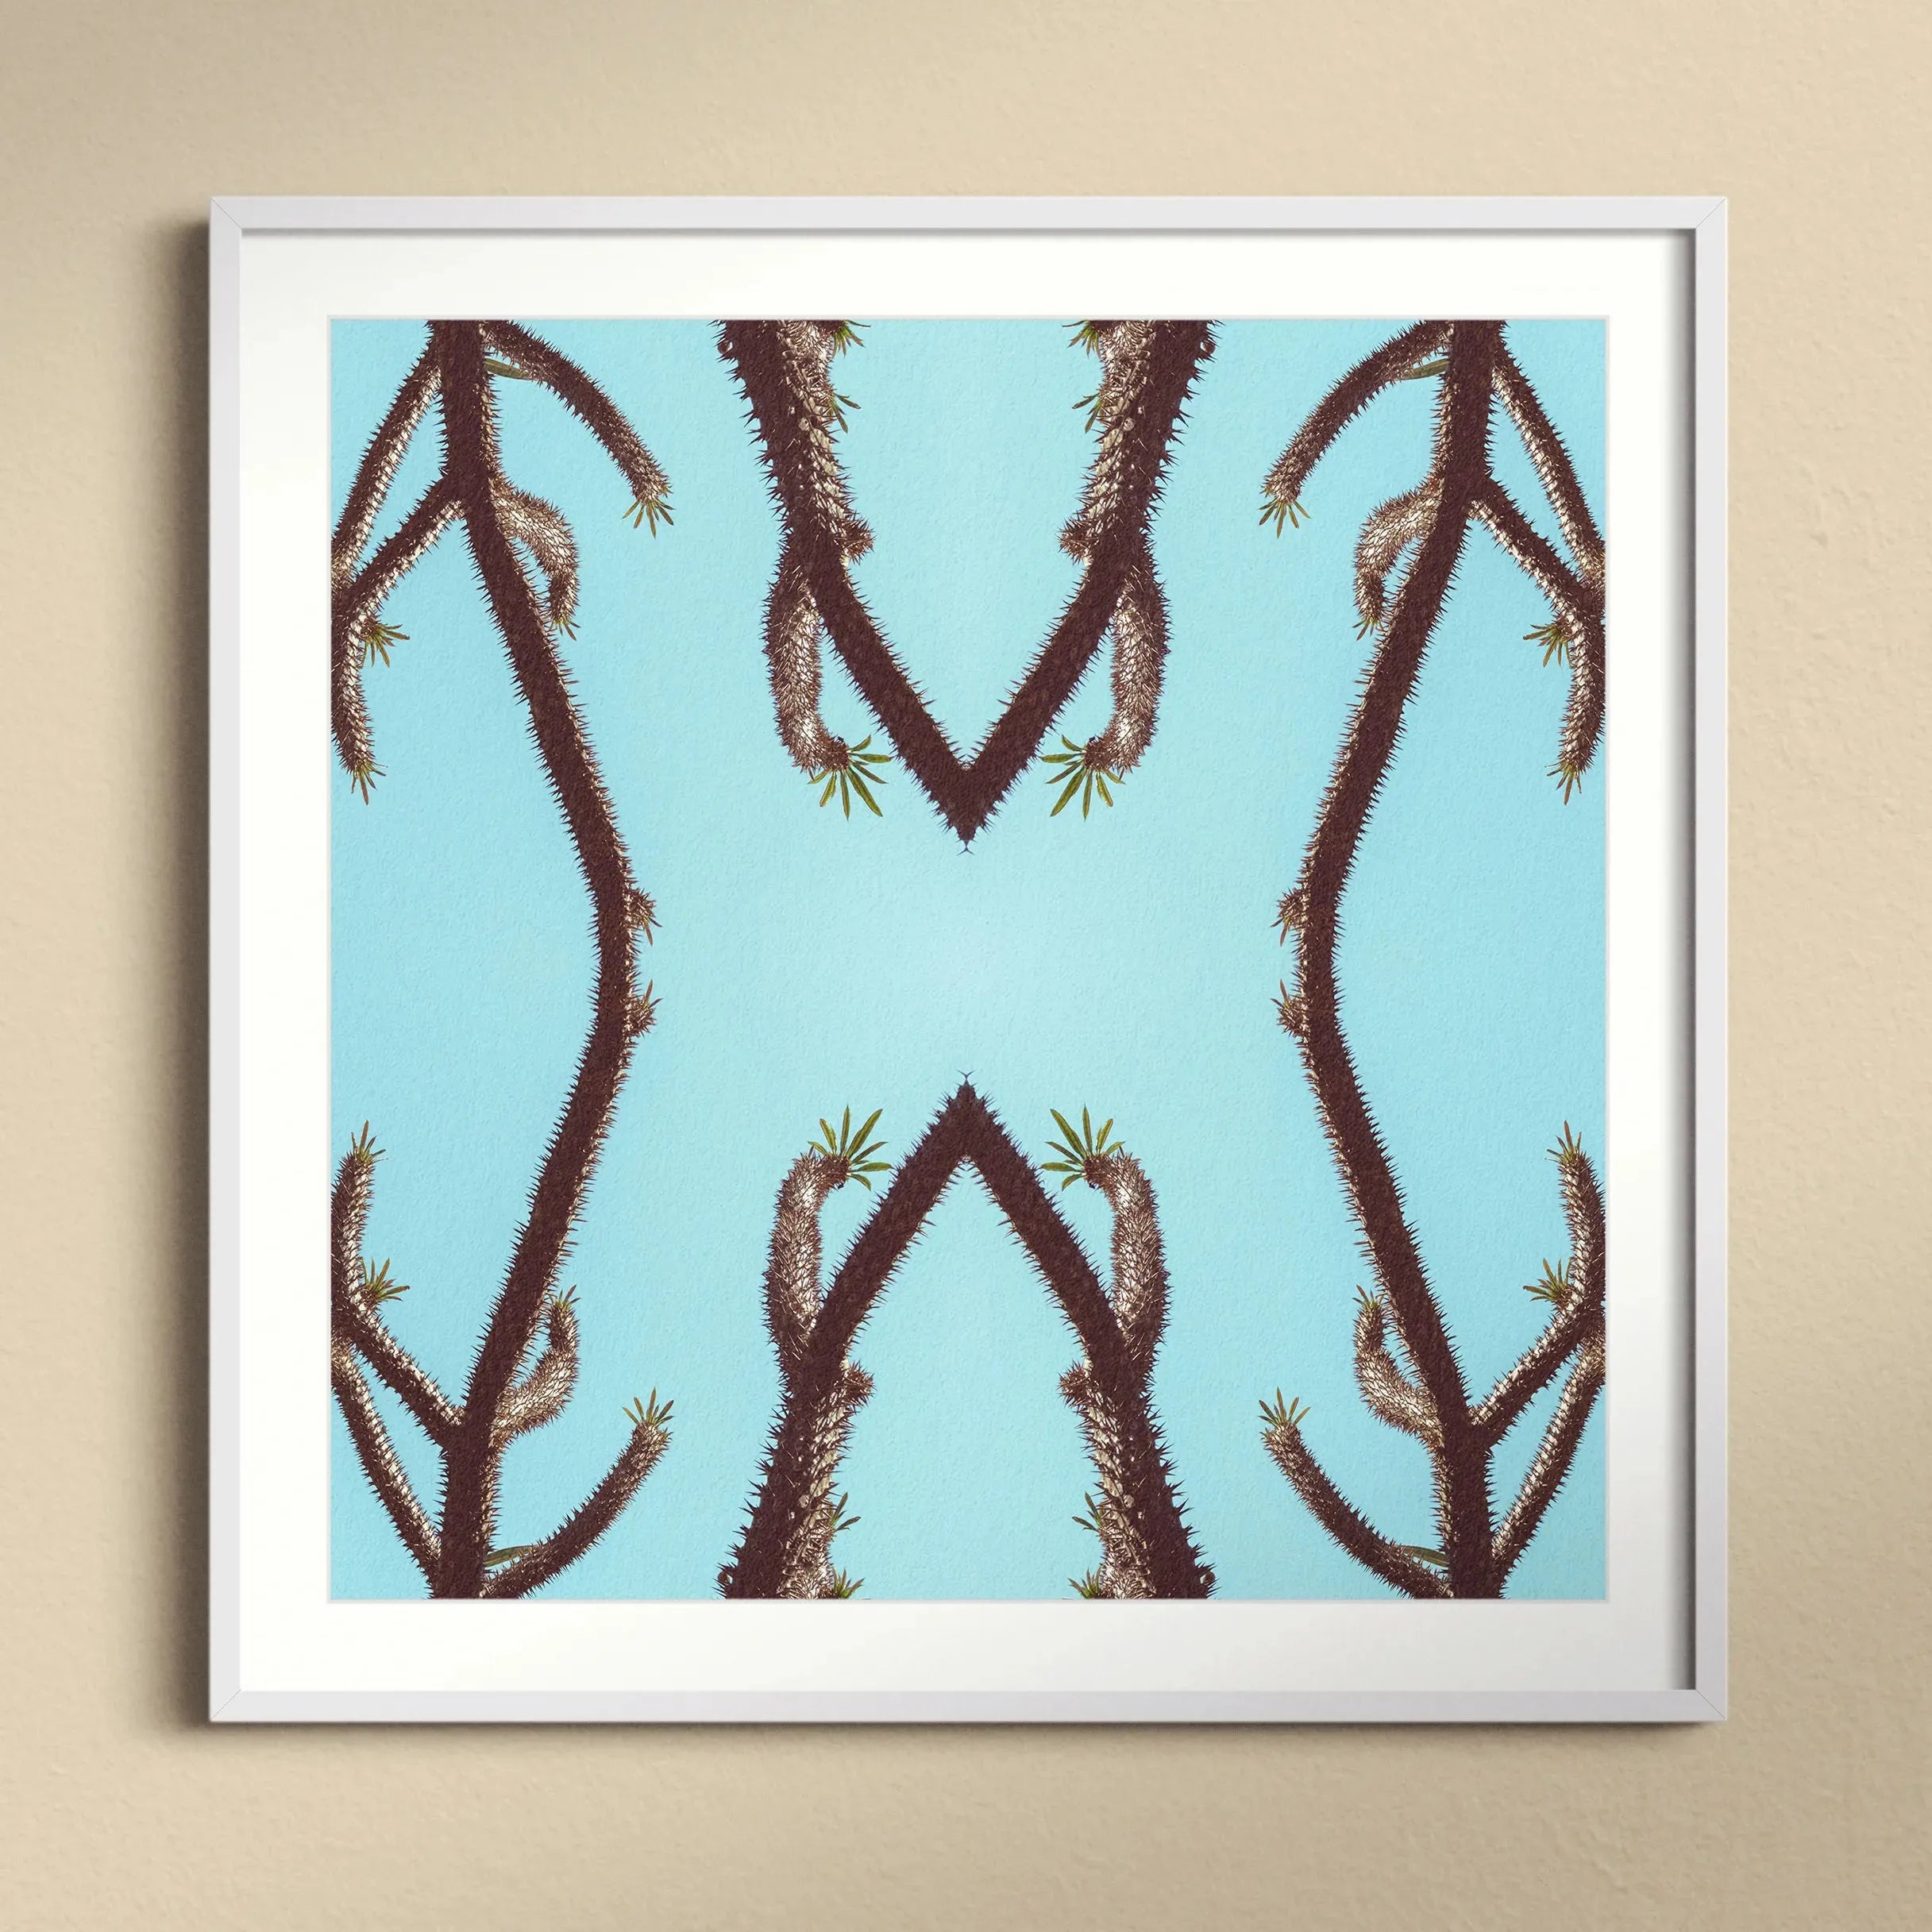 Chain Reaction Framed & Mounted Print - Posters Prints & Visual Artwork - Aesthetic Art